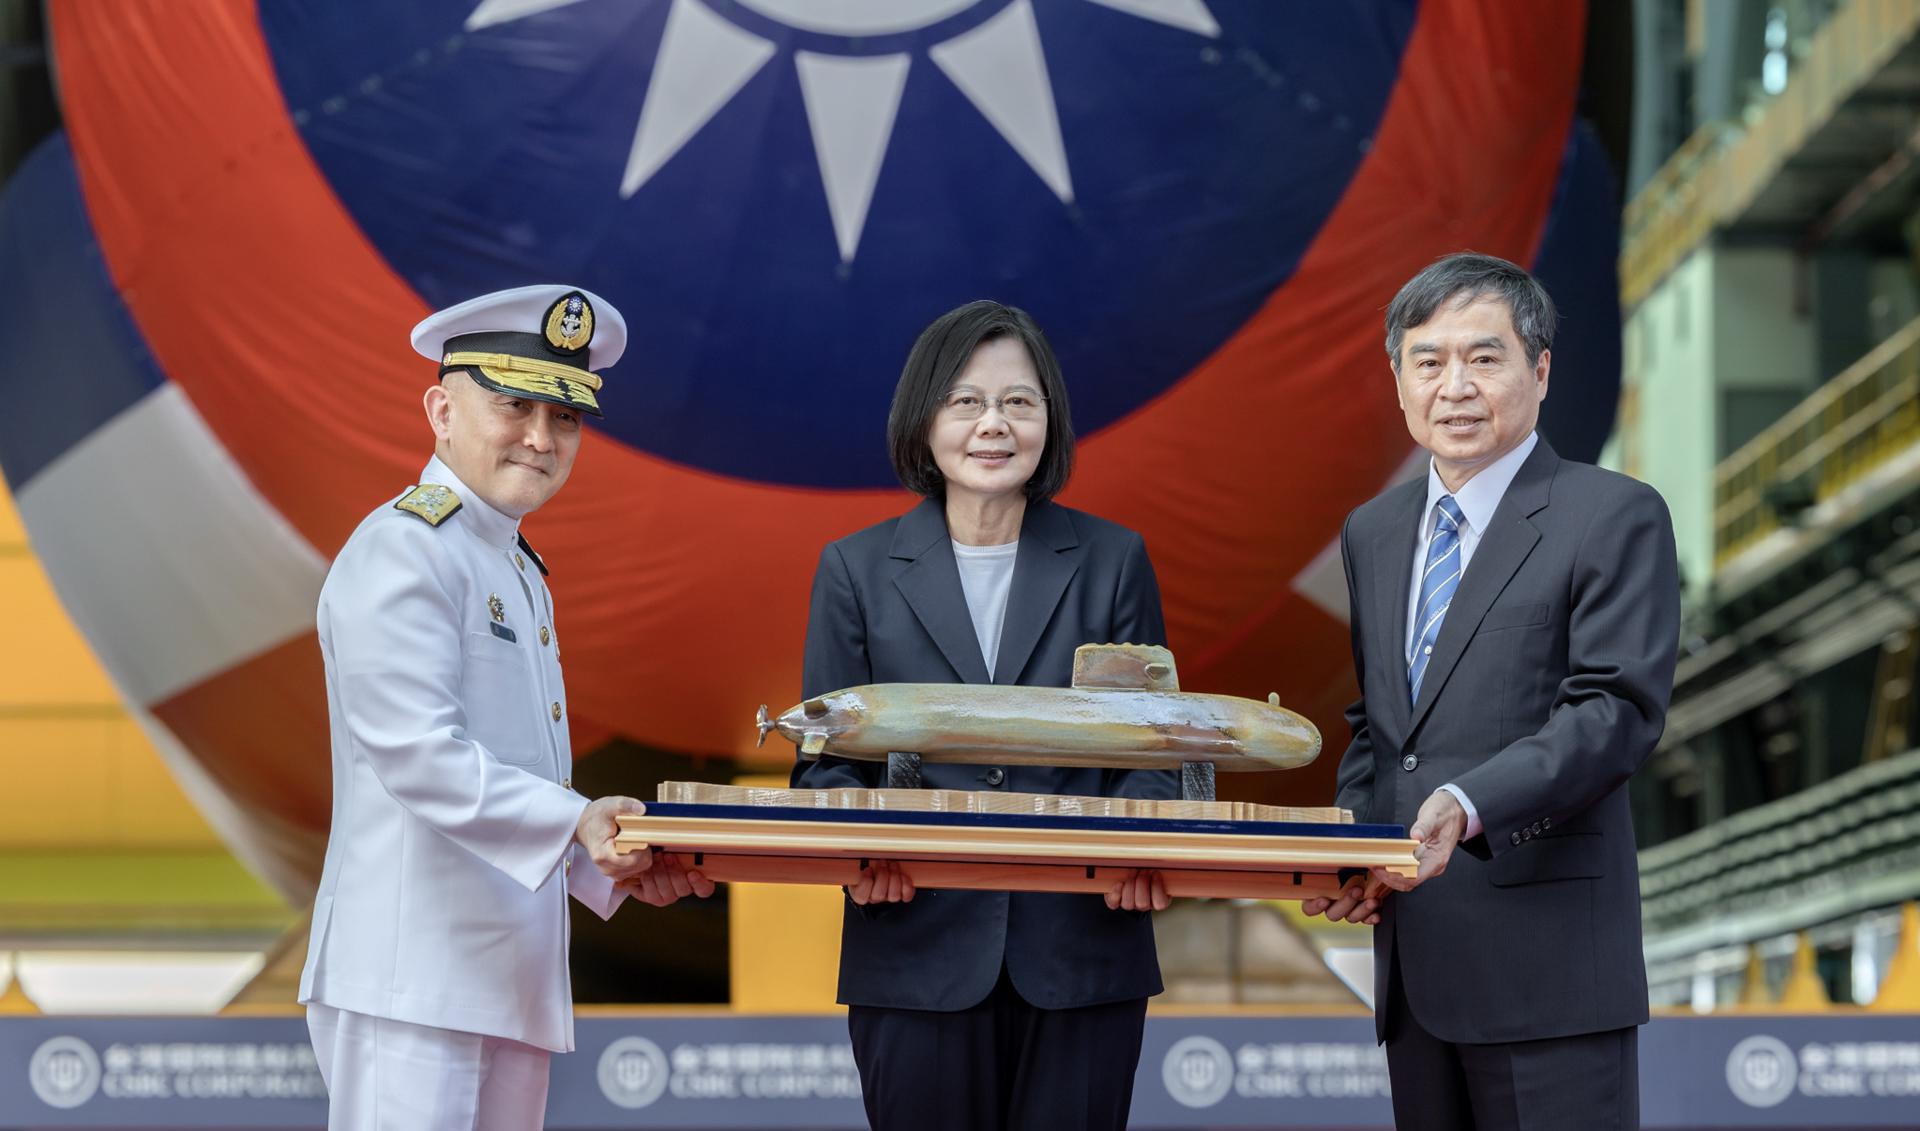 A handout photo made available by Taiwan's Presidential office shows Taiwan's President Tsai Ing-wen (C) posing with the model of a submarine prototype during the launching ceremony of Taiwan's first domestically-made submarine named 'Haikun' at a shipyard in Kaohsiung, Taiwan, 28 September 2023. EFE-EPA FILE/TAIWAN PRESIDENTIAL OFFICE / HANDOUT HANDOUT EDITORIAL USE ONLY/NO SALES